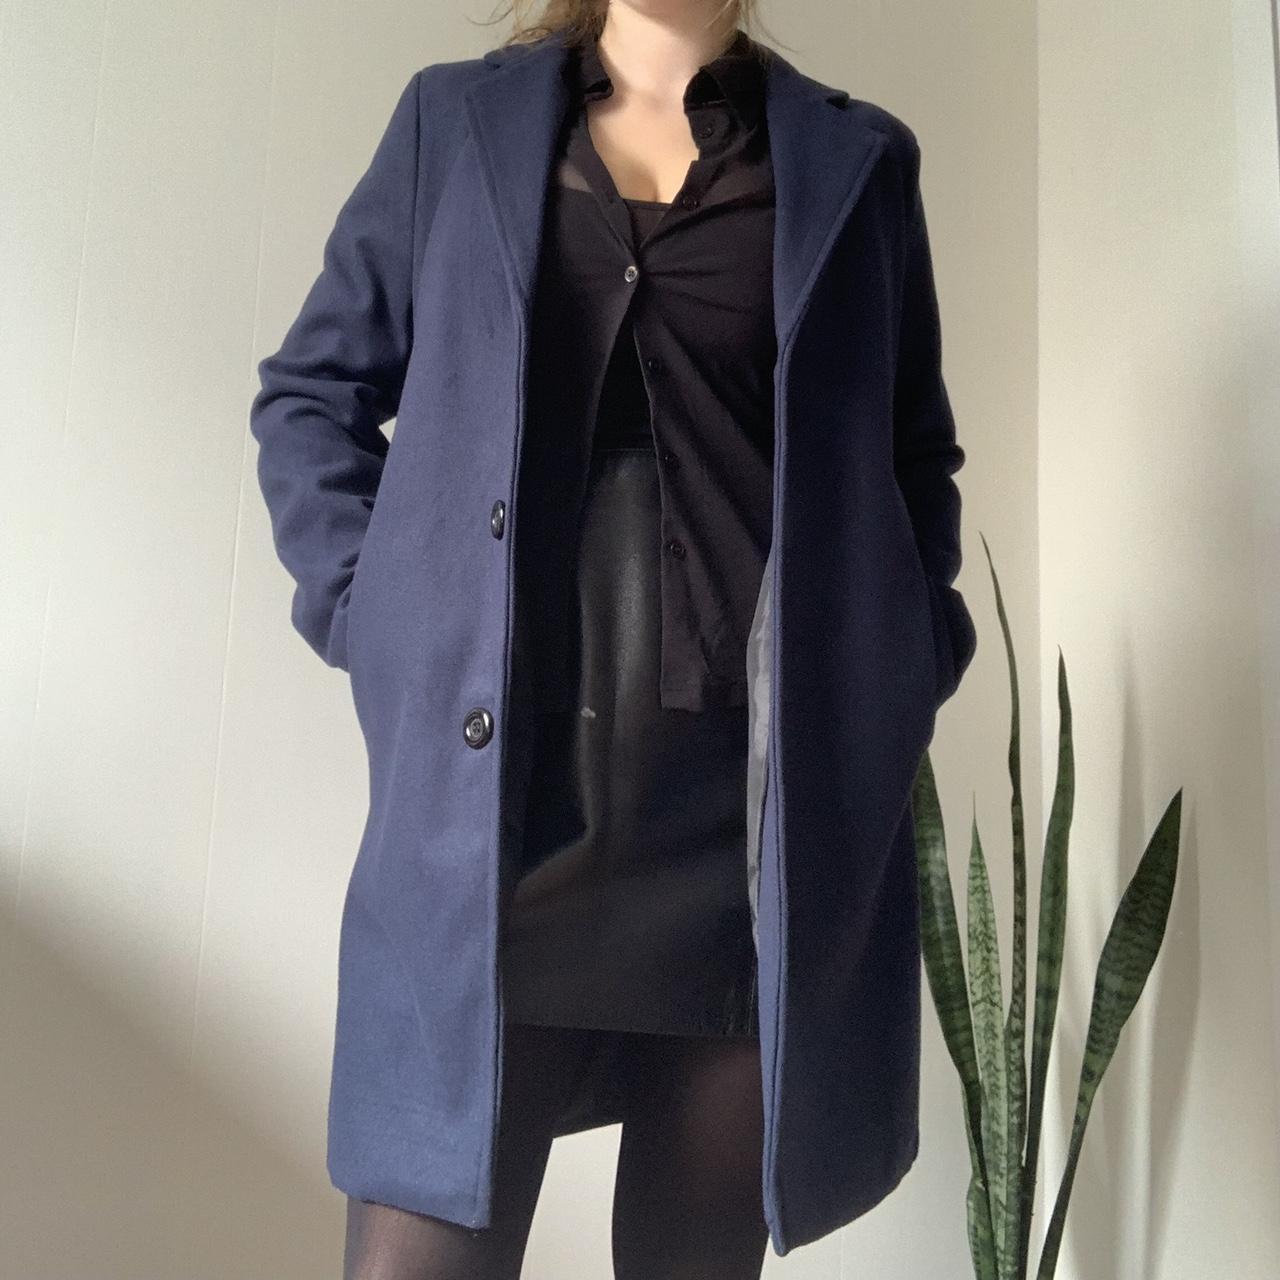 Women's Navy and Blue Jacket (2)